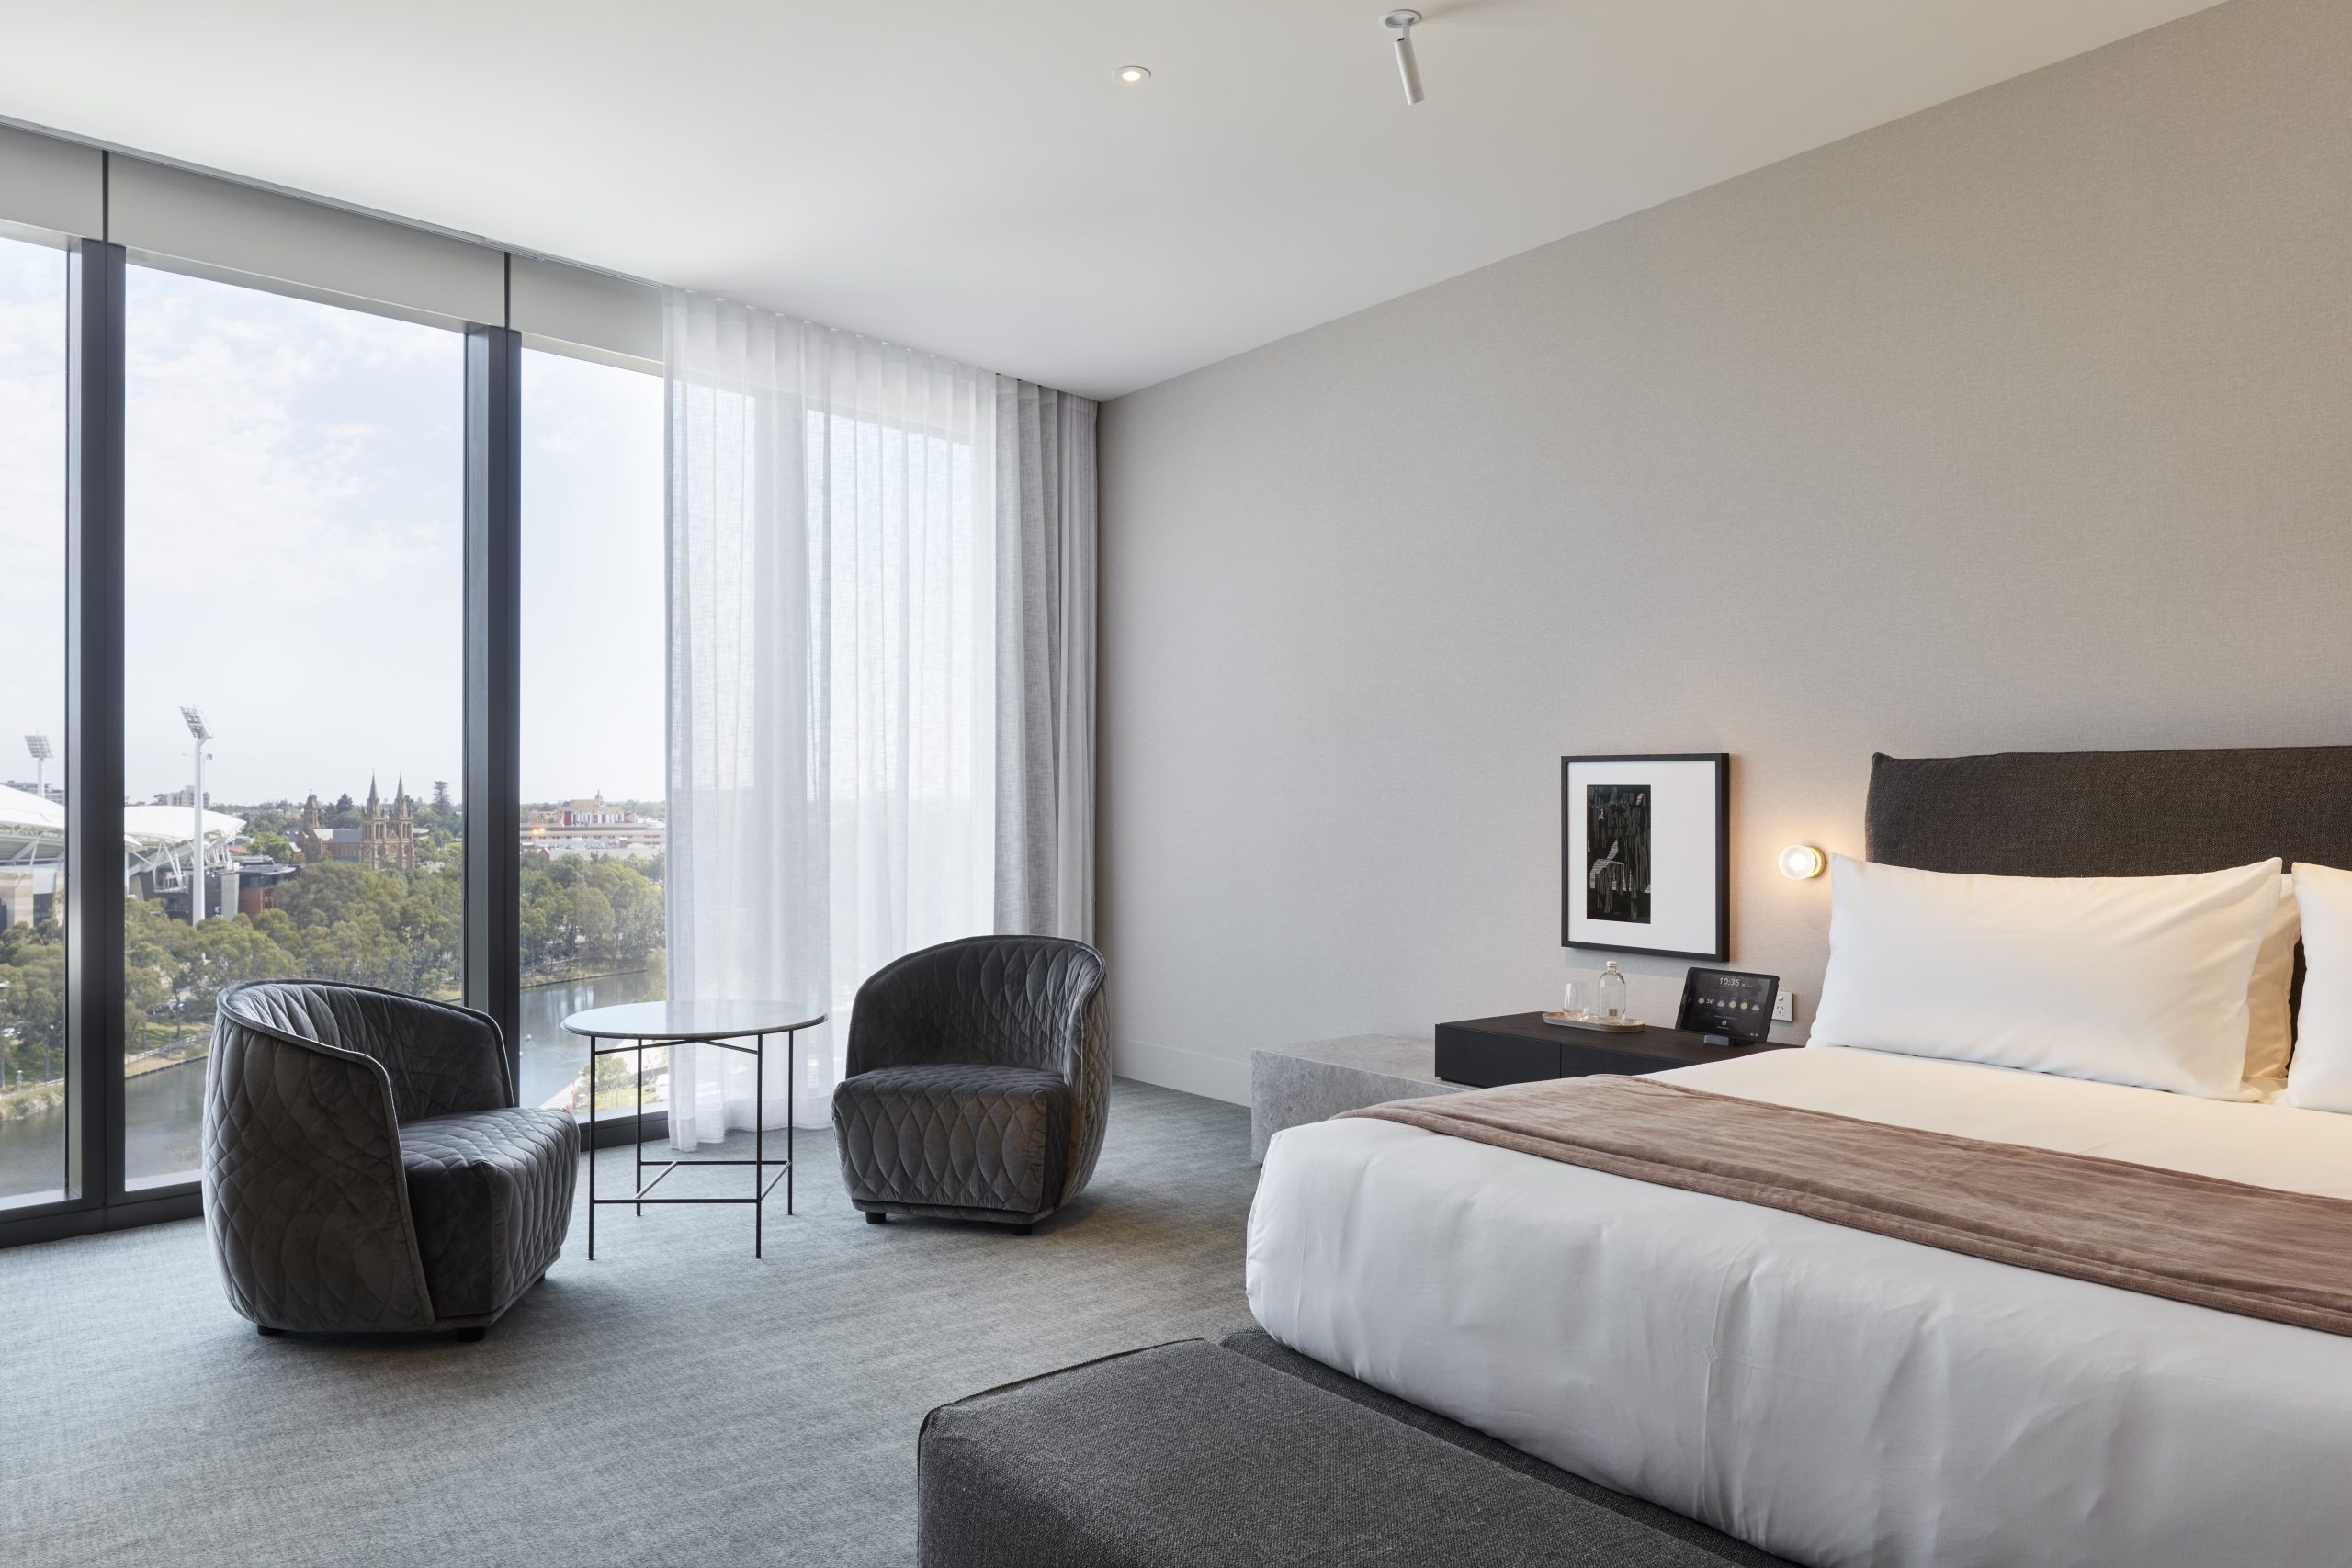 WIN a mid-week stay at Eos by SkyCity in a stunning Allure River View King with full breakfast for two people